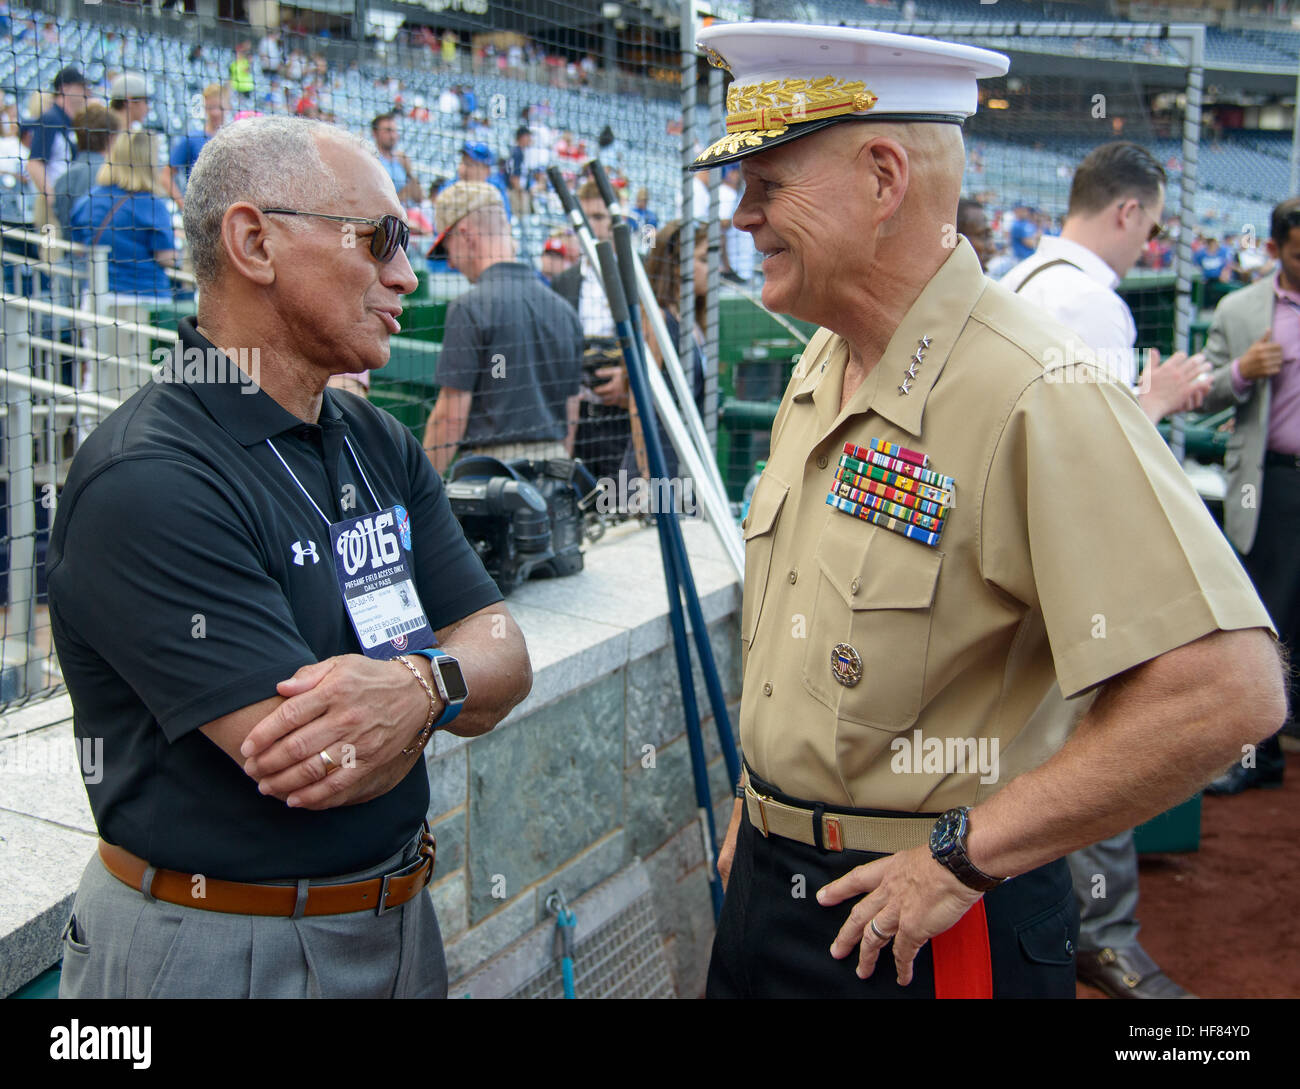 NASA Administrator Charles Bolden, left, speaks with General Robert B. Neller, commandant of the United States Marine Corps before the start of a baseball game between the Los Angeles Dodgers and the Washington Nationals, Wednesday, July 20, 2016 at Nationals Park in Washington. Stock Photo